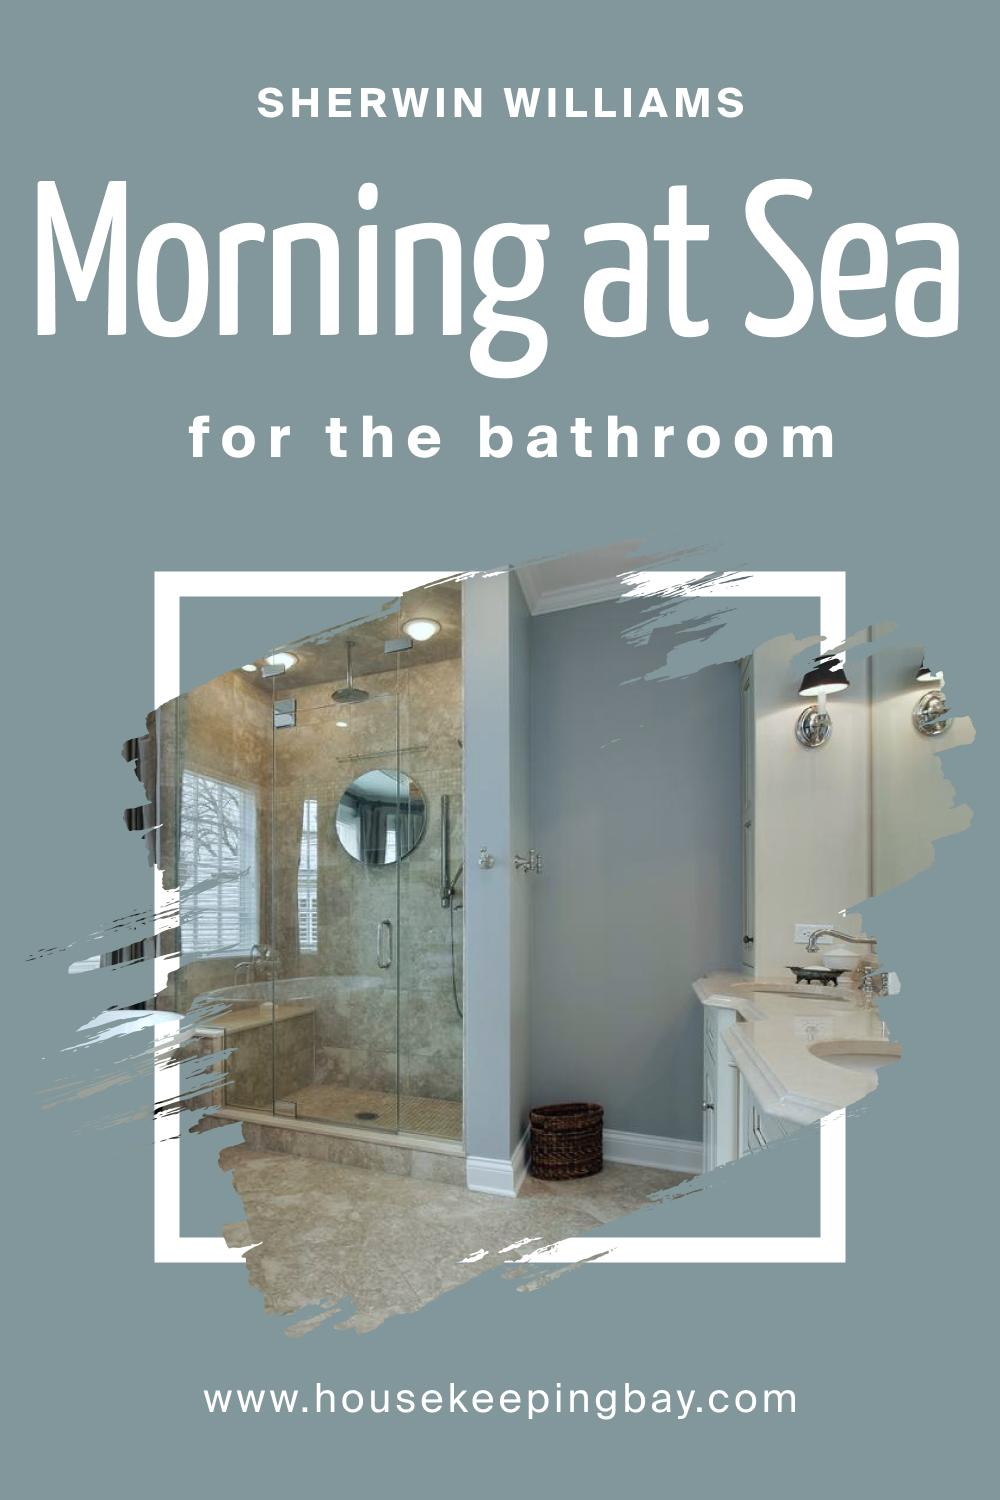 Sherwin Williams. SW 9634 Morning at Sea For the Bathroom